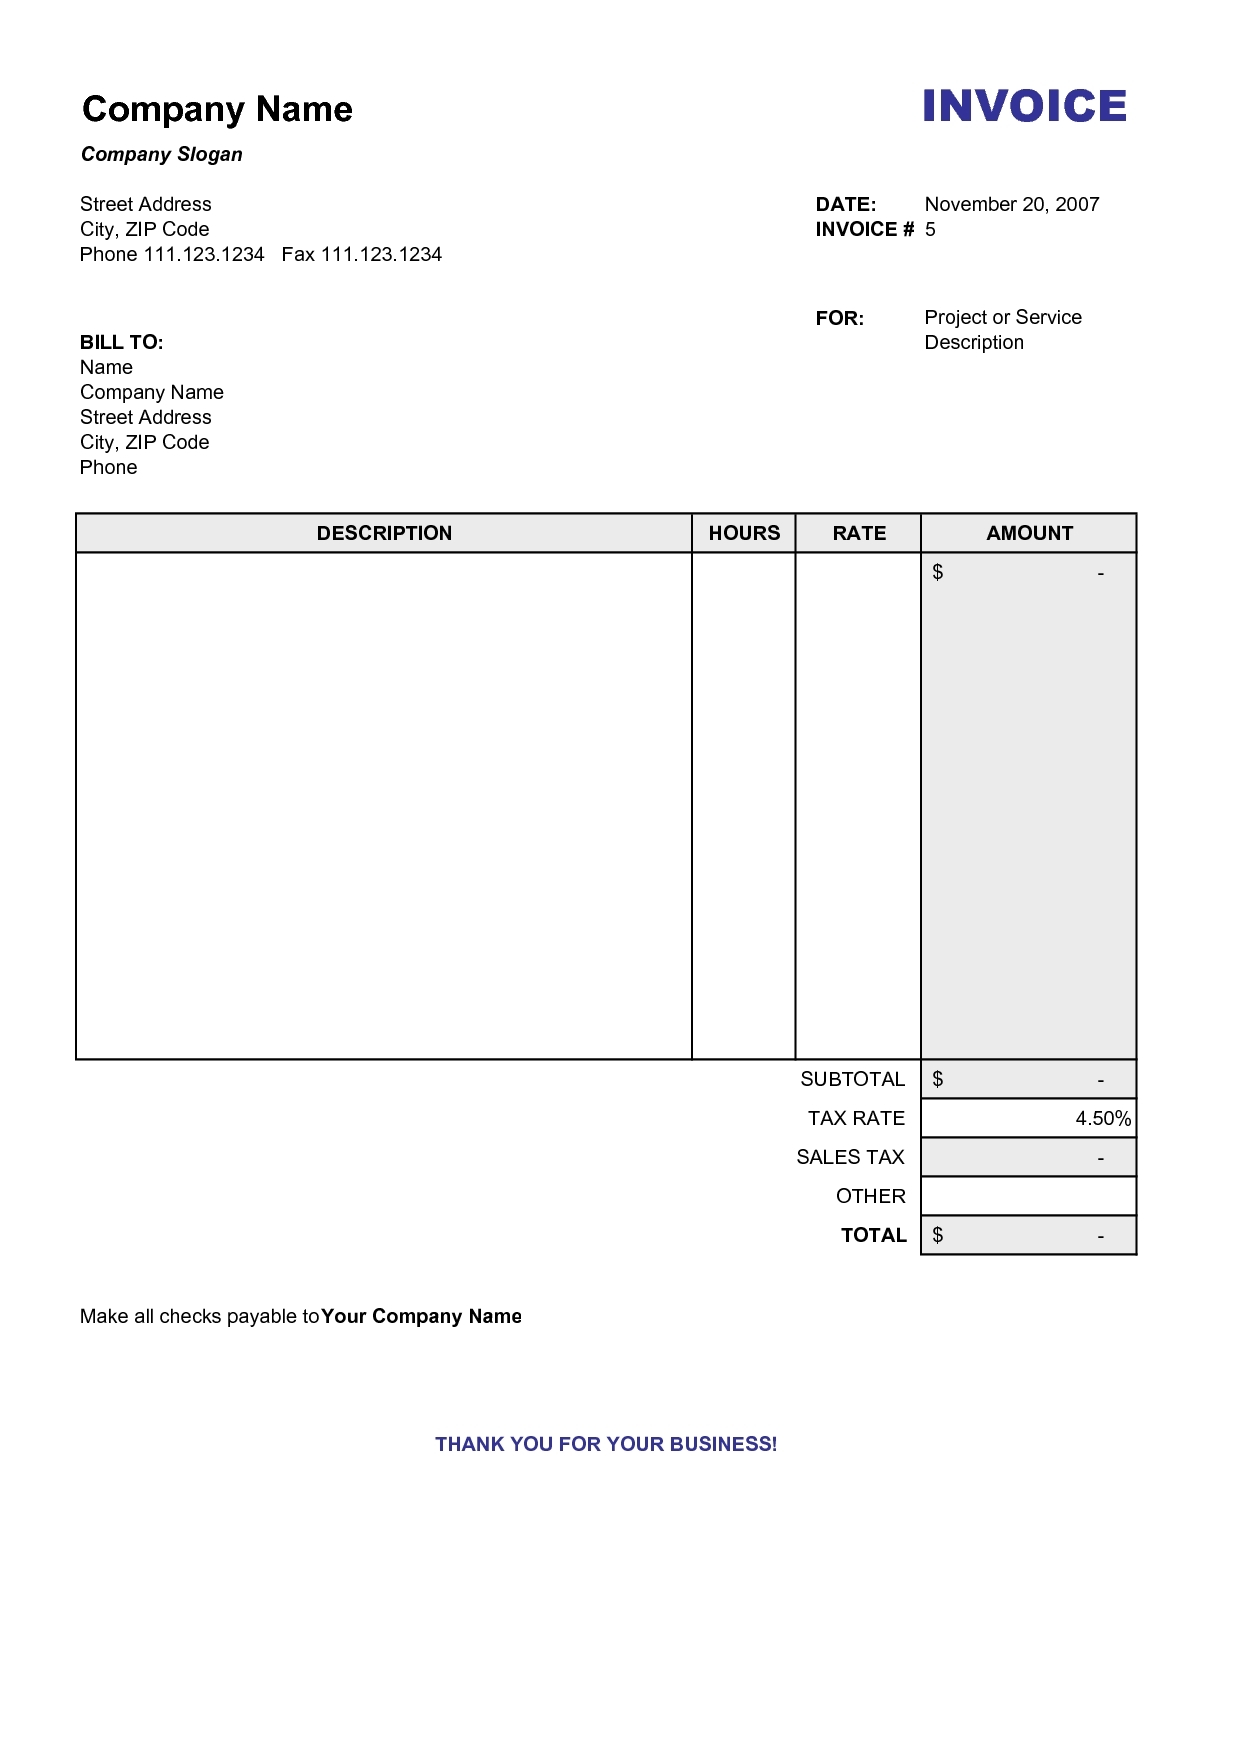 copy of a blank invoice invoice template free 2016 copy of blank invoice